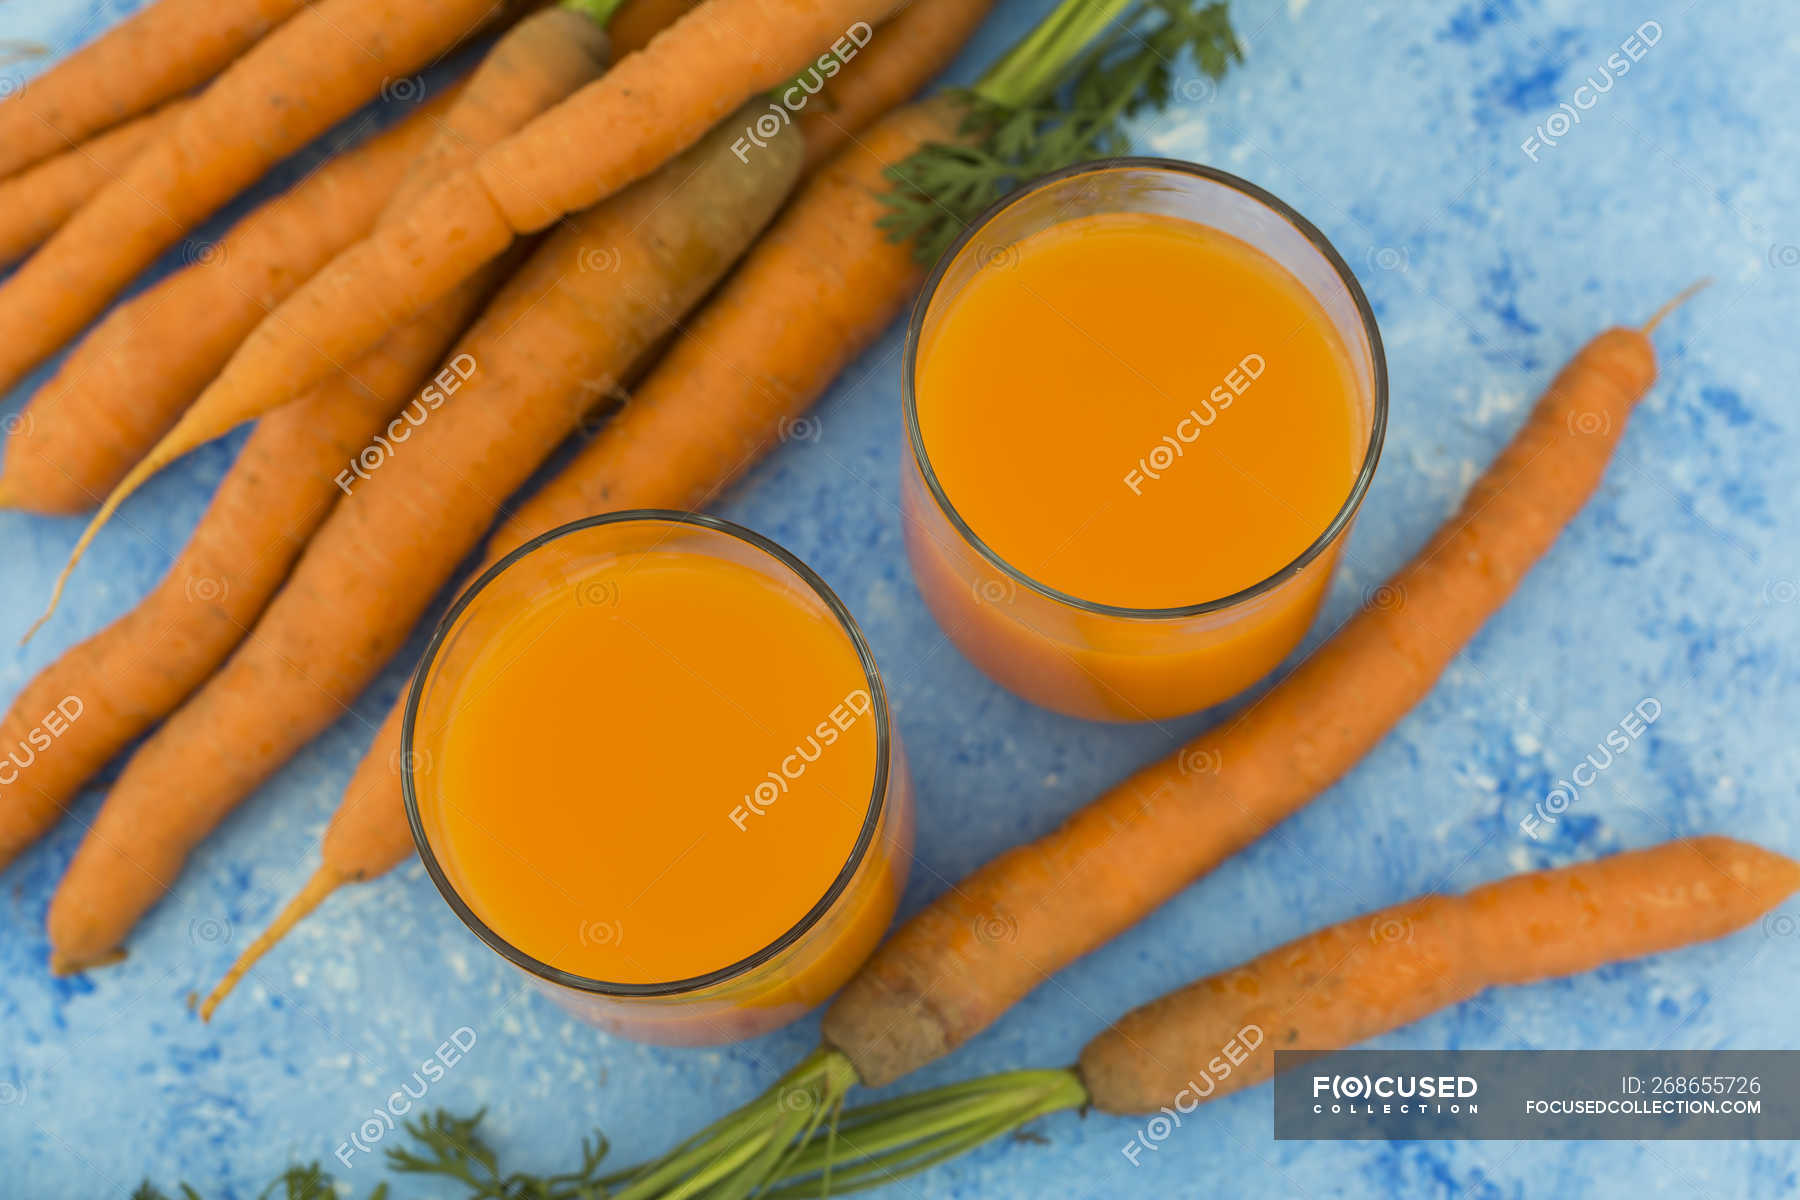 Two glasses of fresh carrot juice and carrots on light blue ground —  Elevated View, indoors - Stock Photo | #268655726